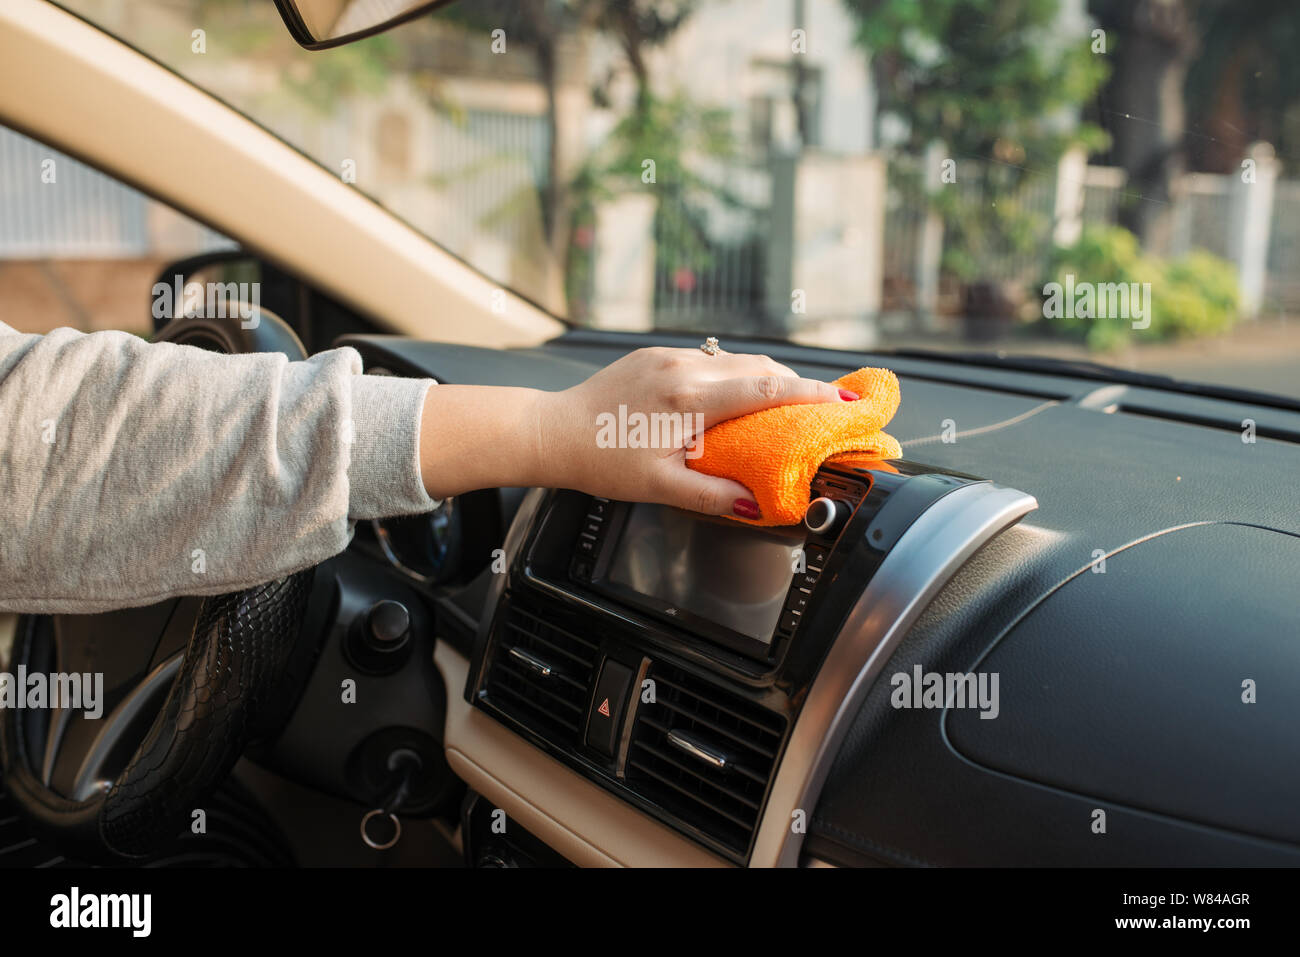 Hand with microfiber cloth cleaning seat, auto detailing and valeting concept, washing car care interior, selective focus Stock Photo